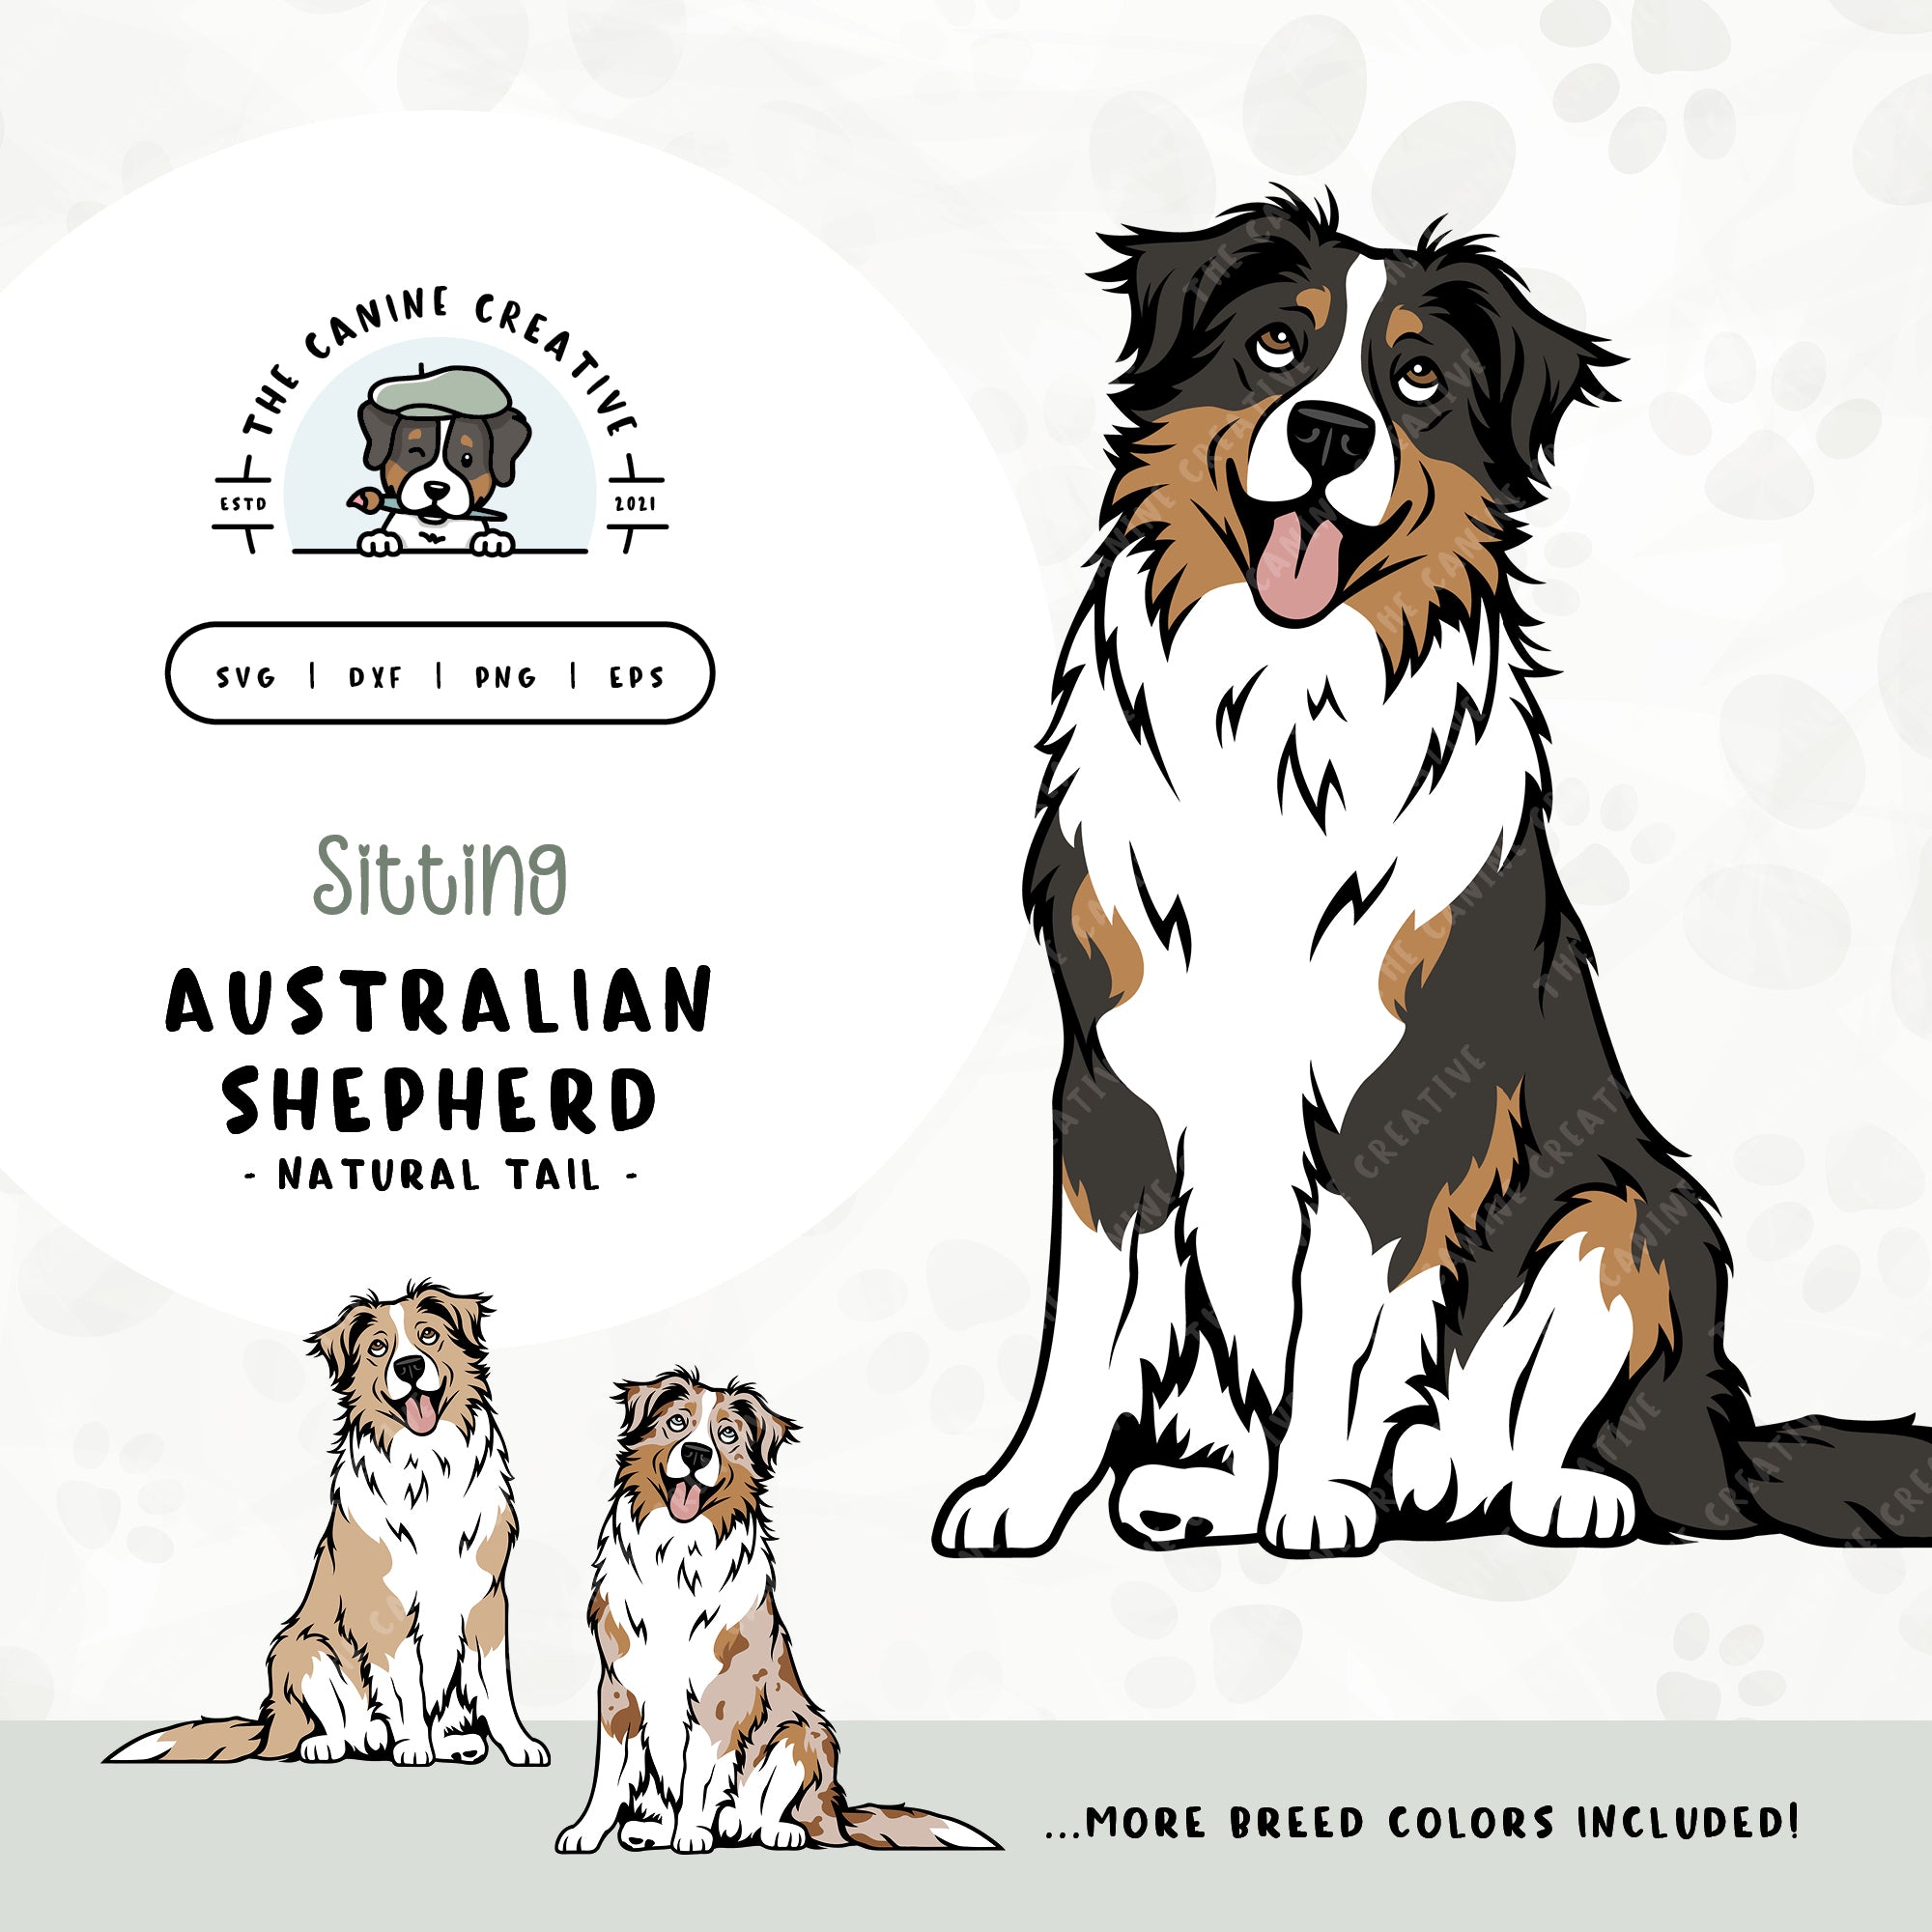 This sitting dog design features an Australian Shepherd with a long tail. File formats include: SVG, DXF, PNG, and EPS.